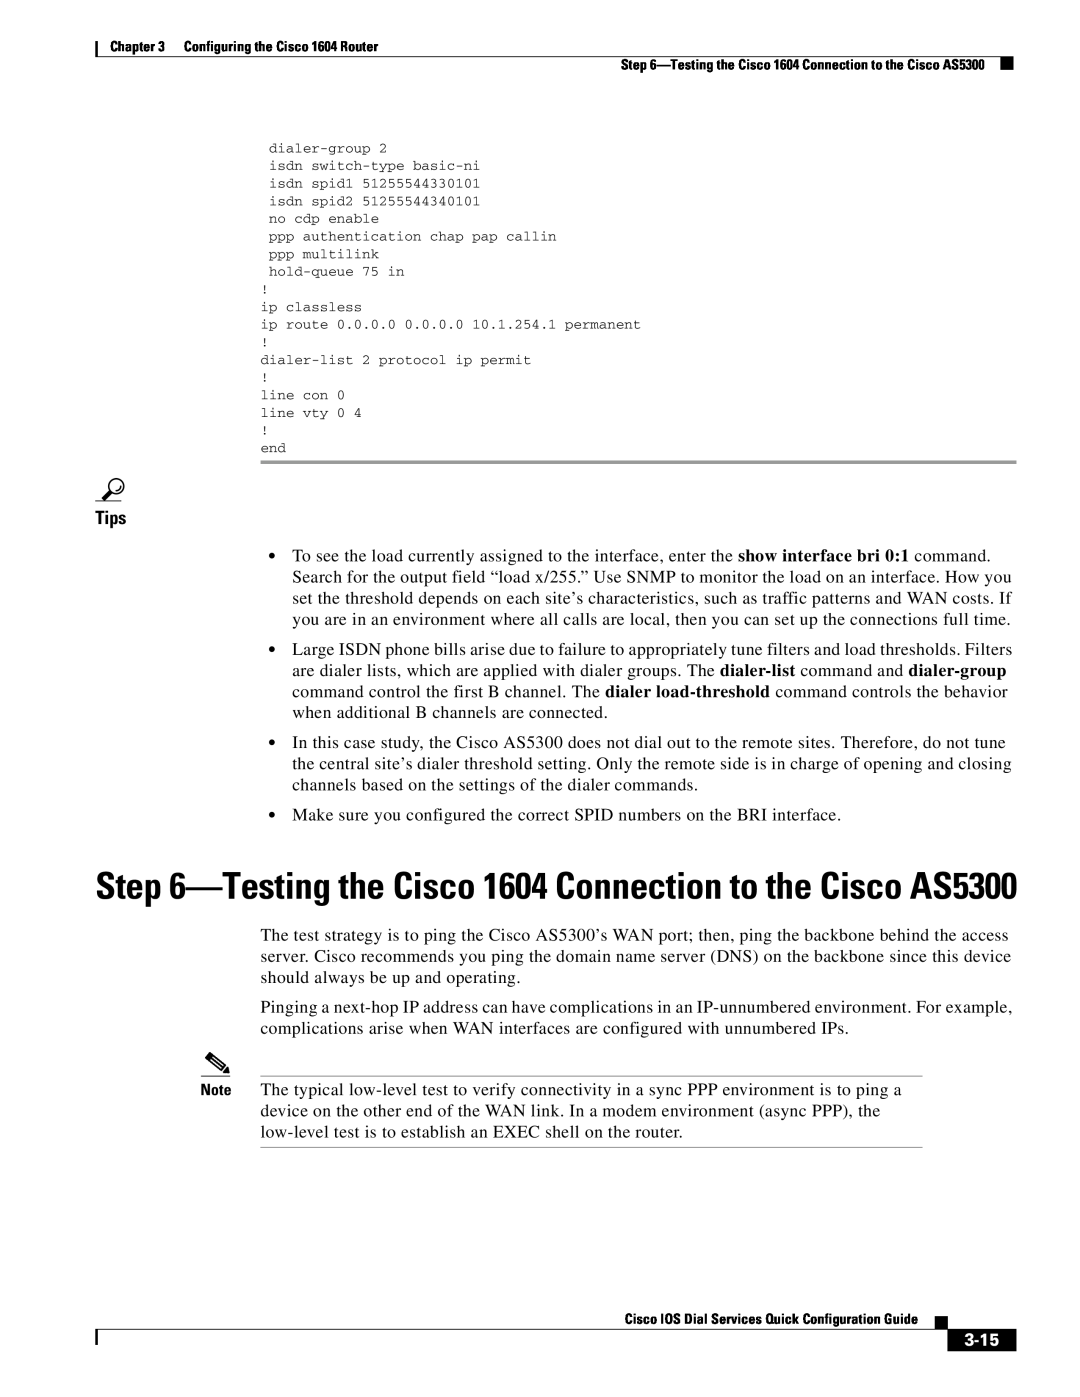 Cisco Systems manual 3-15, Testing the Cisco 1604 Connection to the Cisco AS5300, Tips, dialer-group 